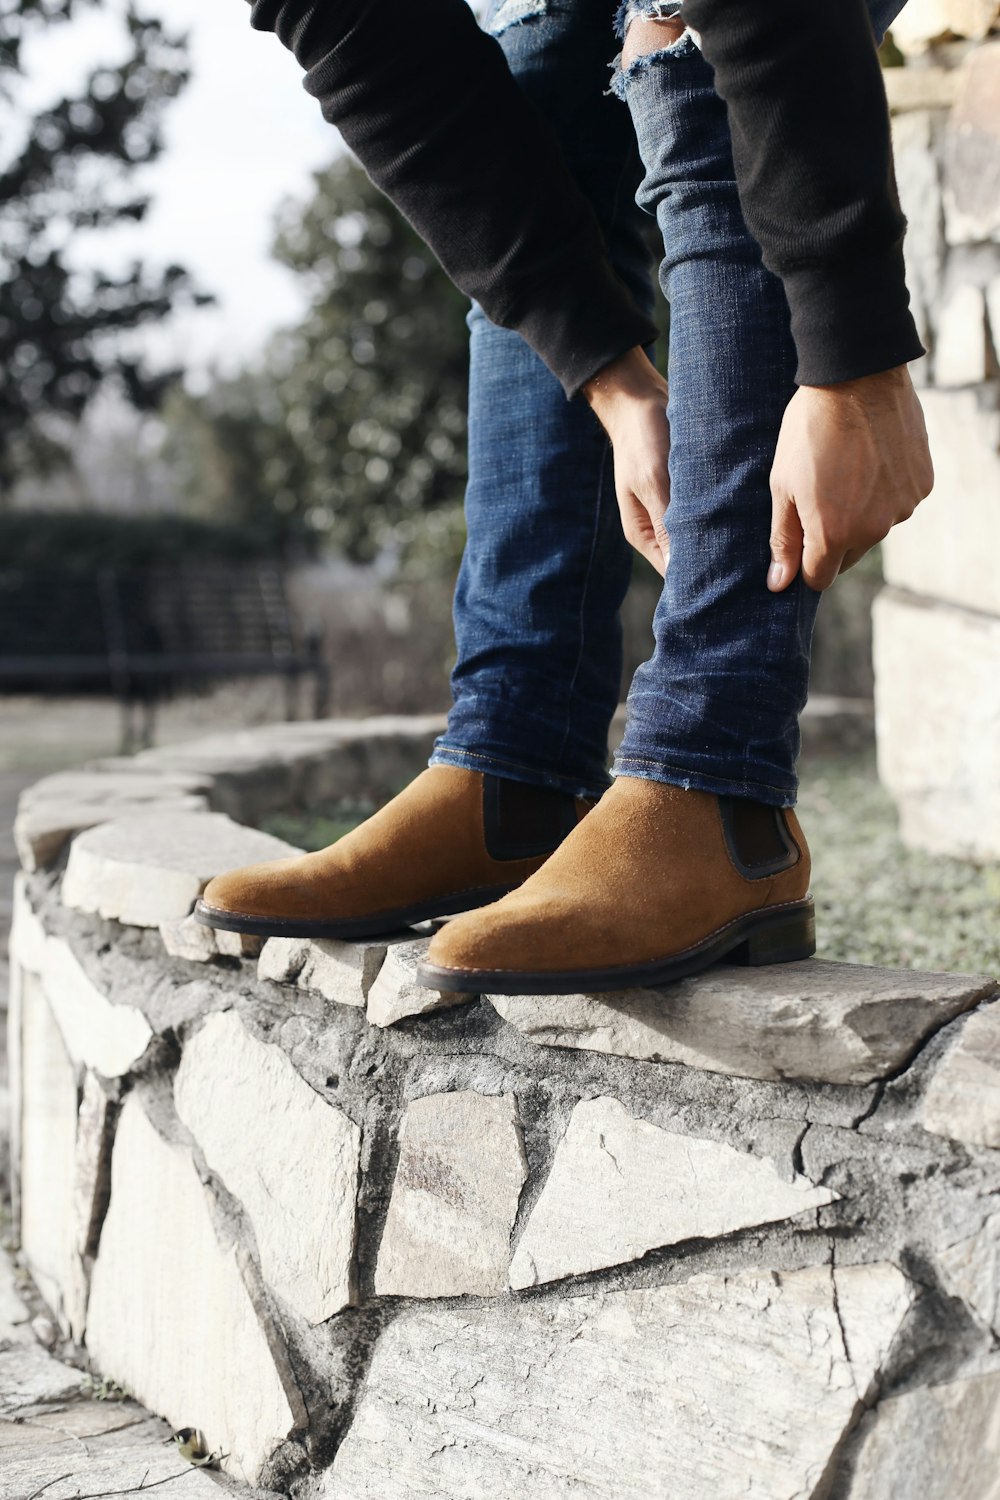 Person Wearing Blue Denim Jeans And Brown Suede Chelsea Boots Standing Photo Free Apparel Image On Unsplash